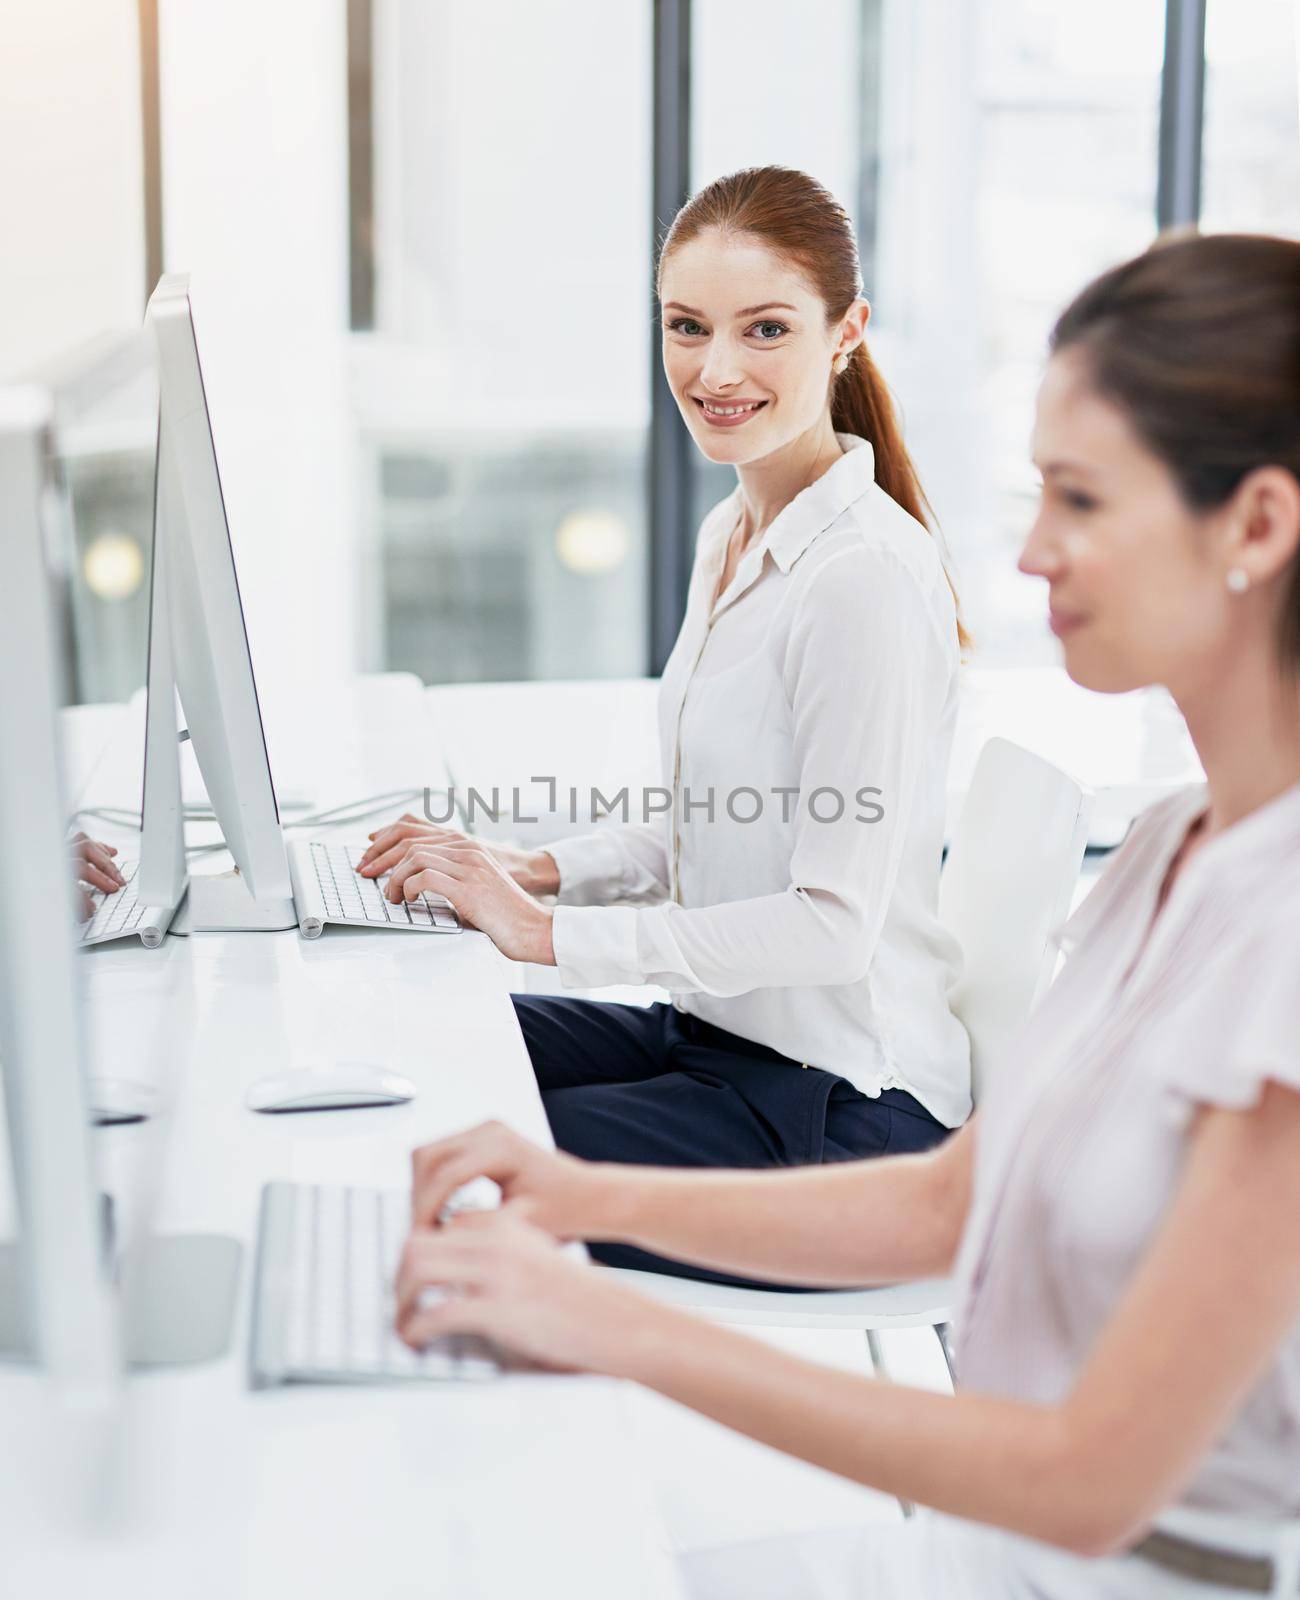 We use technology to maximize our productivity. businesswomen working at their desk